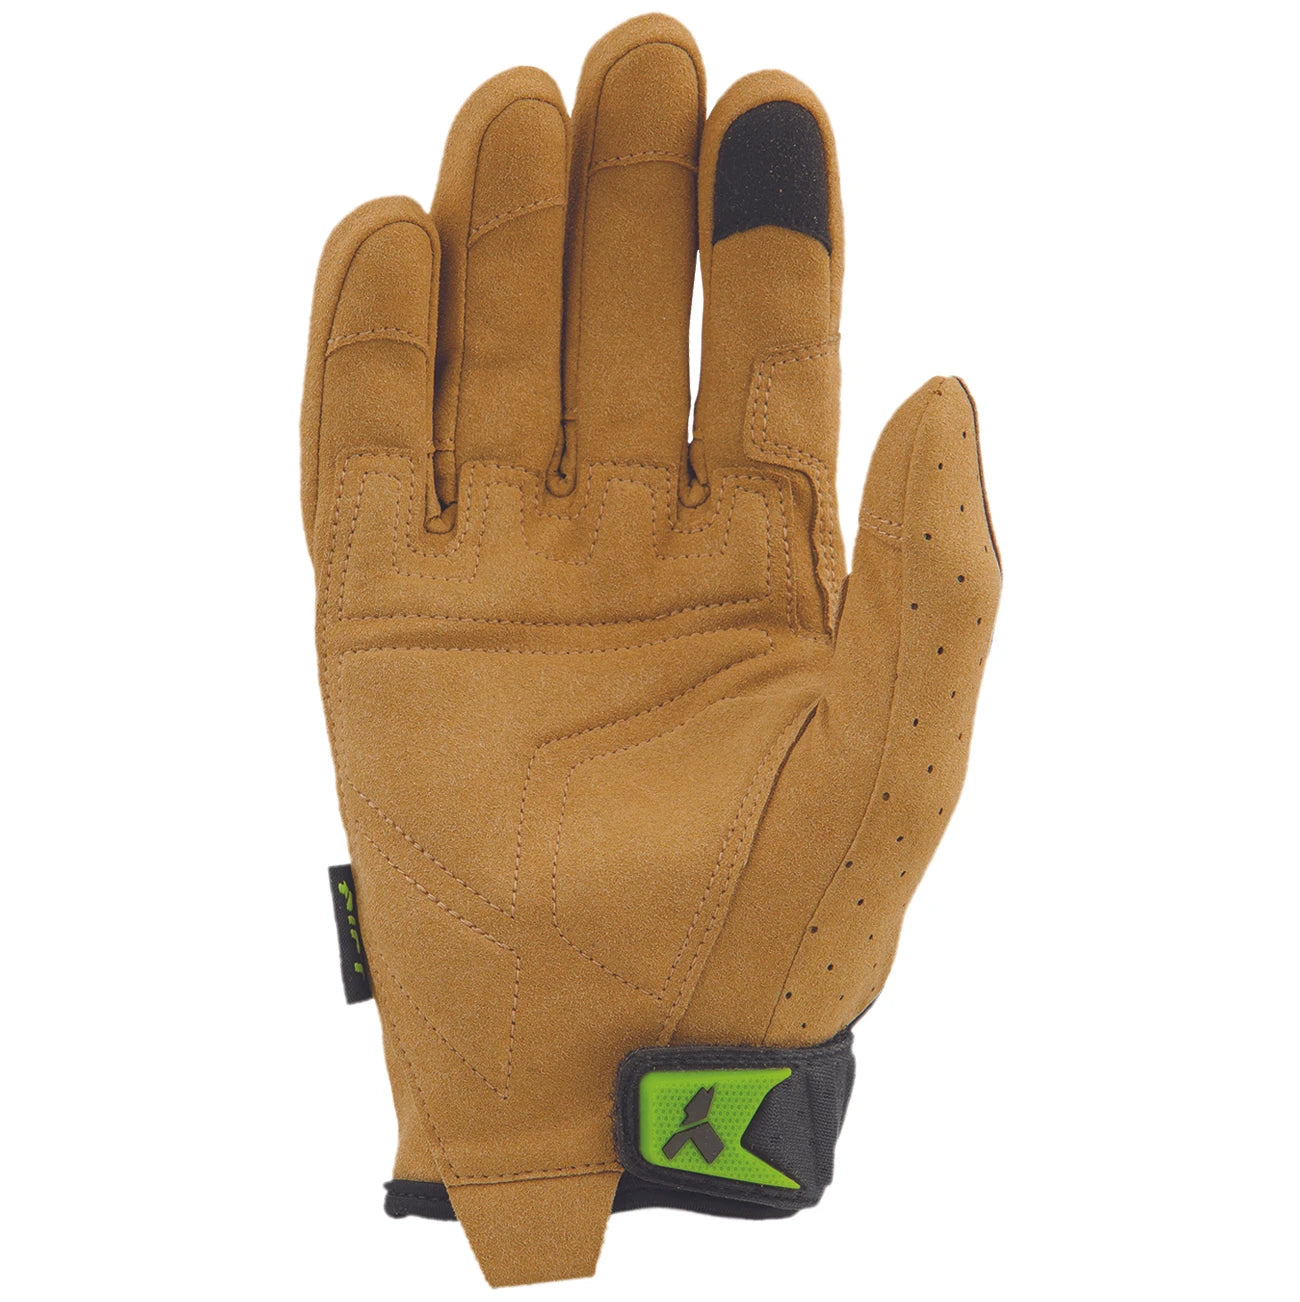 LIFT GRUNT Glove (Brown)- Synthetic Leather with TPR Guards